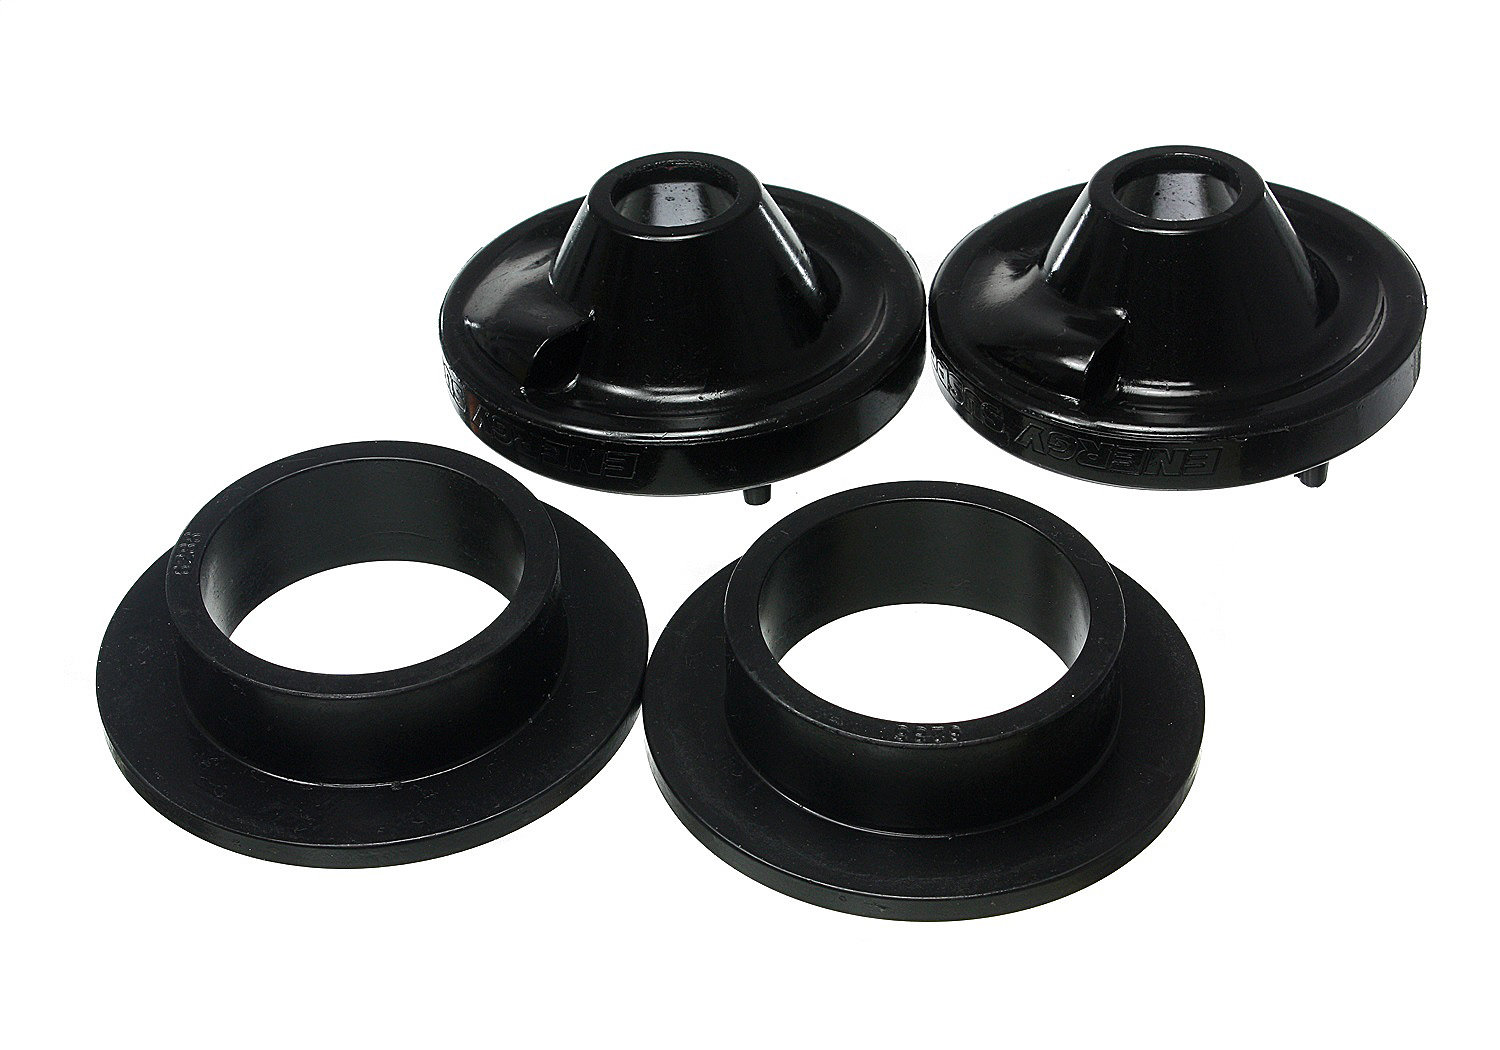 Coil Spring Booster - Rubber Block Coil Spring Booster Series